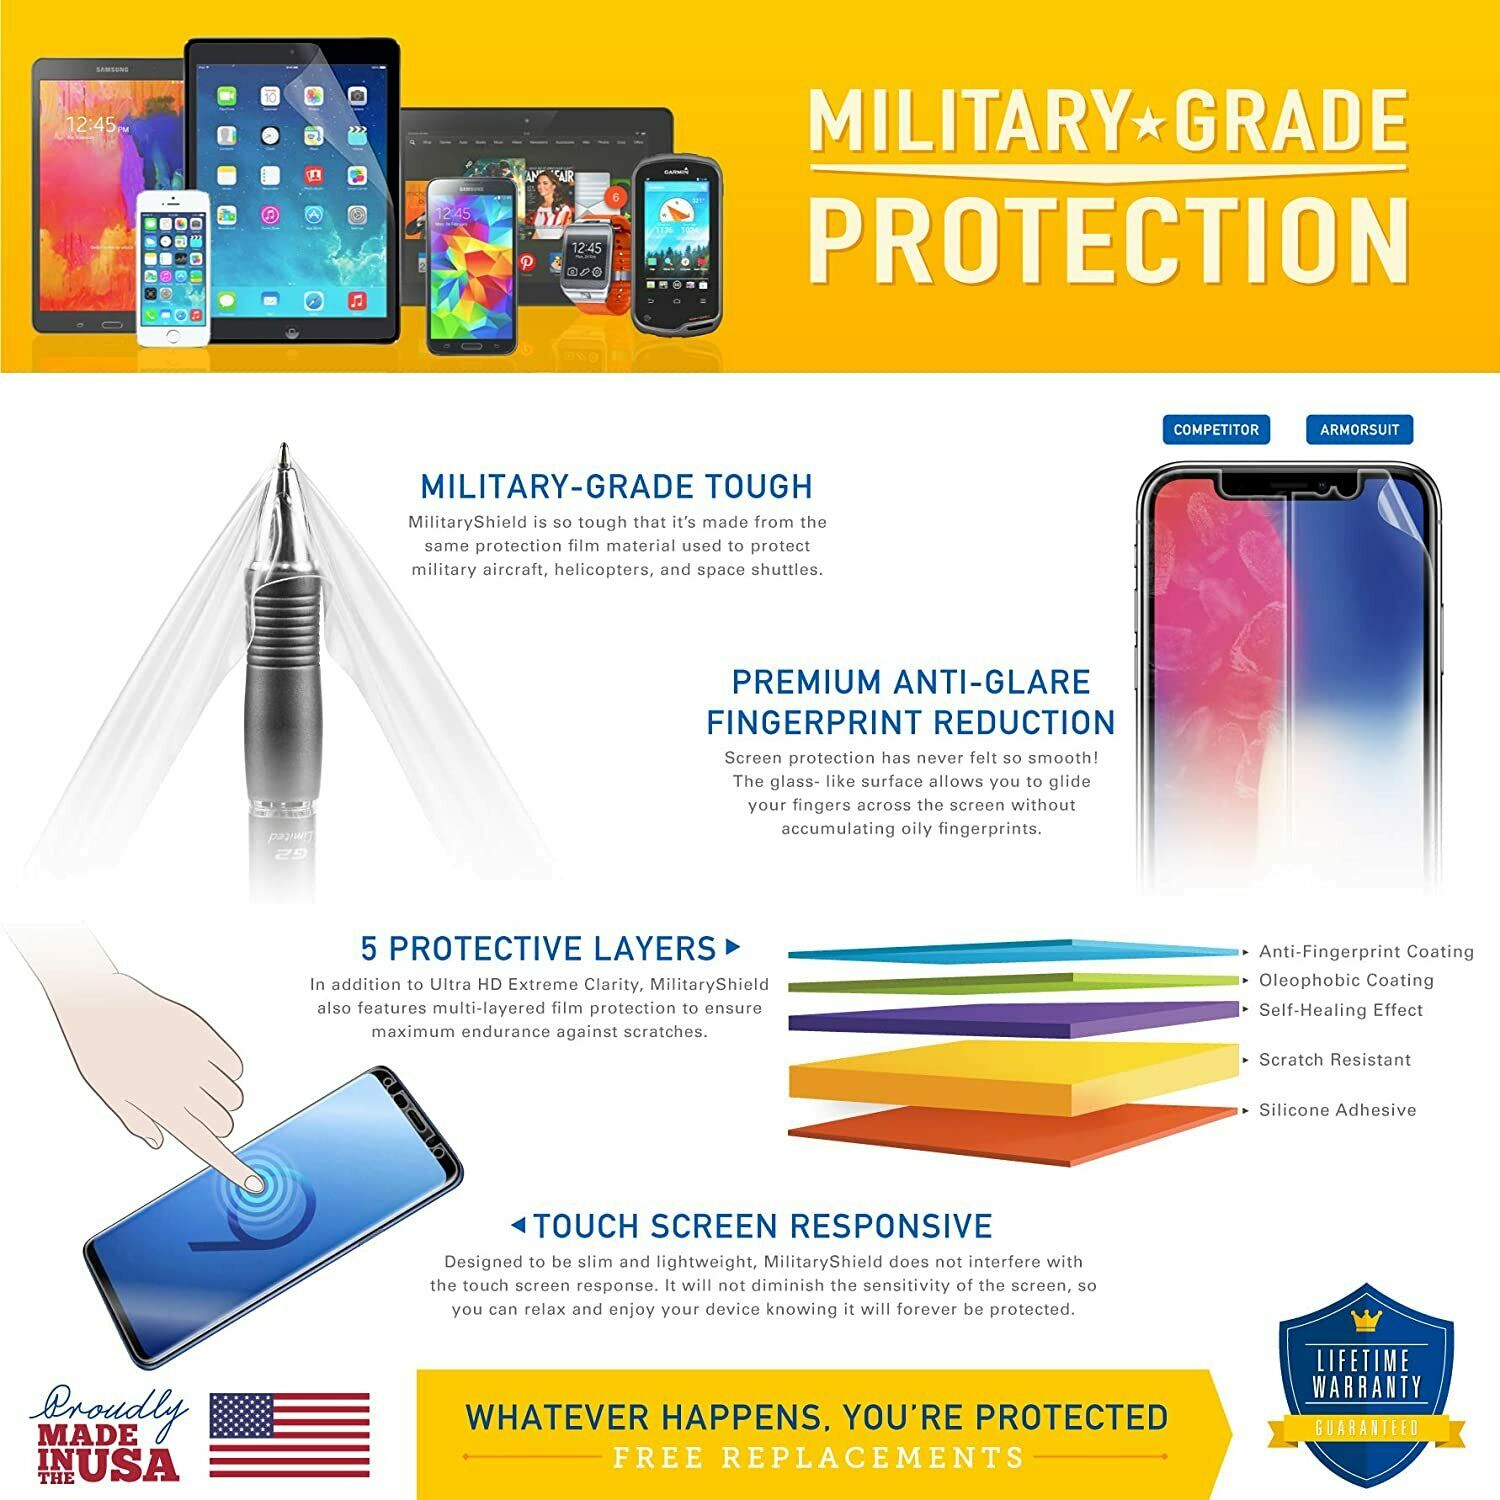 ArmorSuit MilitaryShield [2 Pack] iPhone 14 Pro Max (6.7) Max Coverage Screen Protector USA